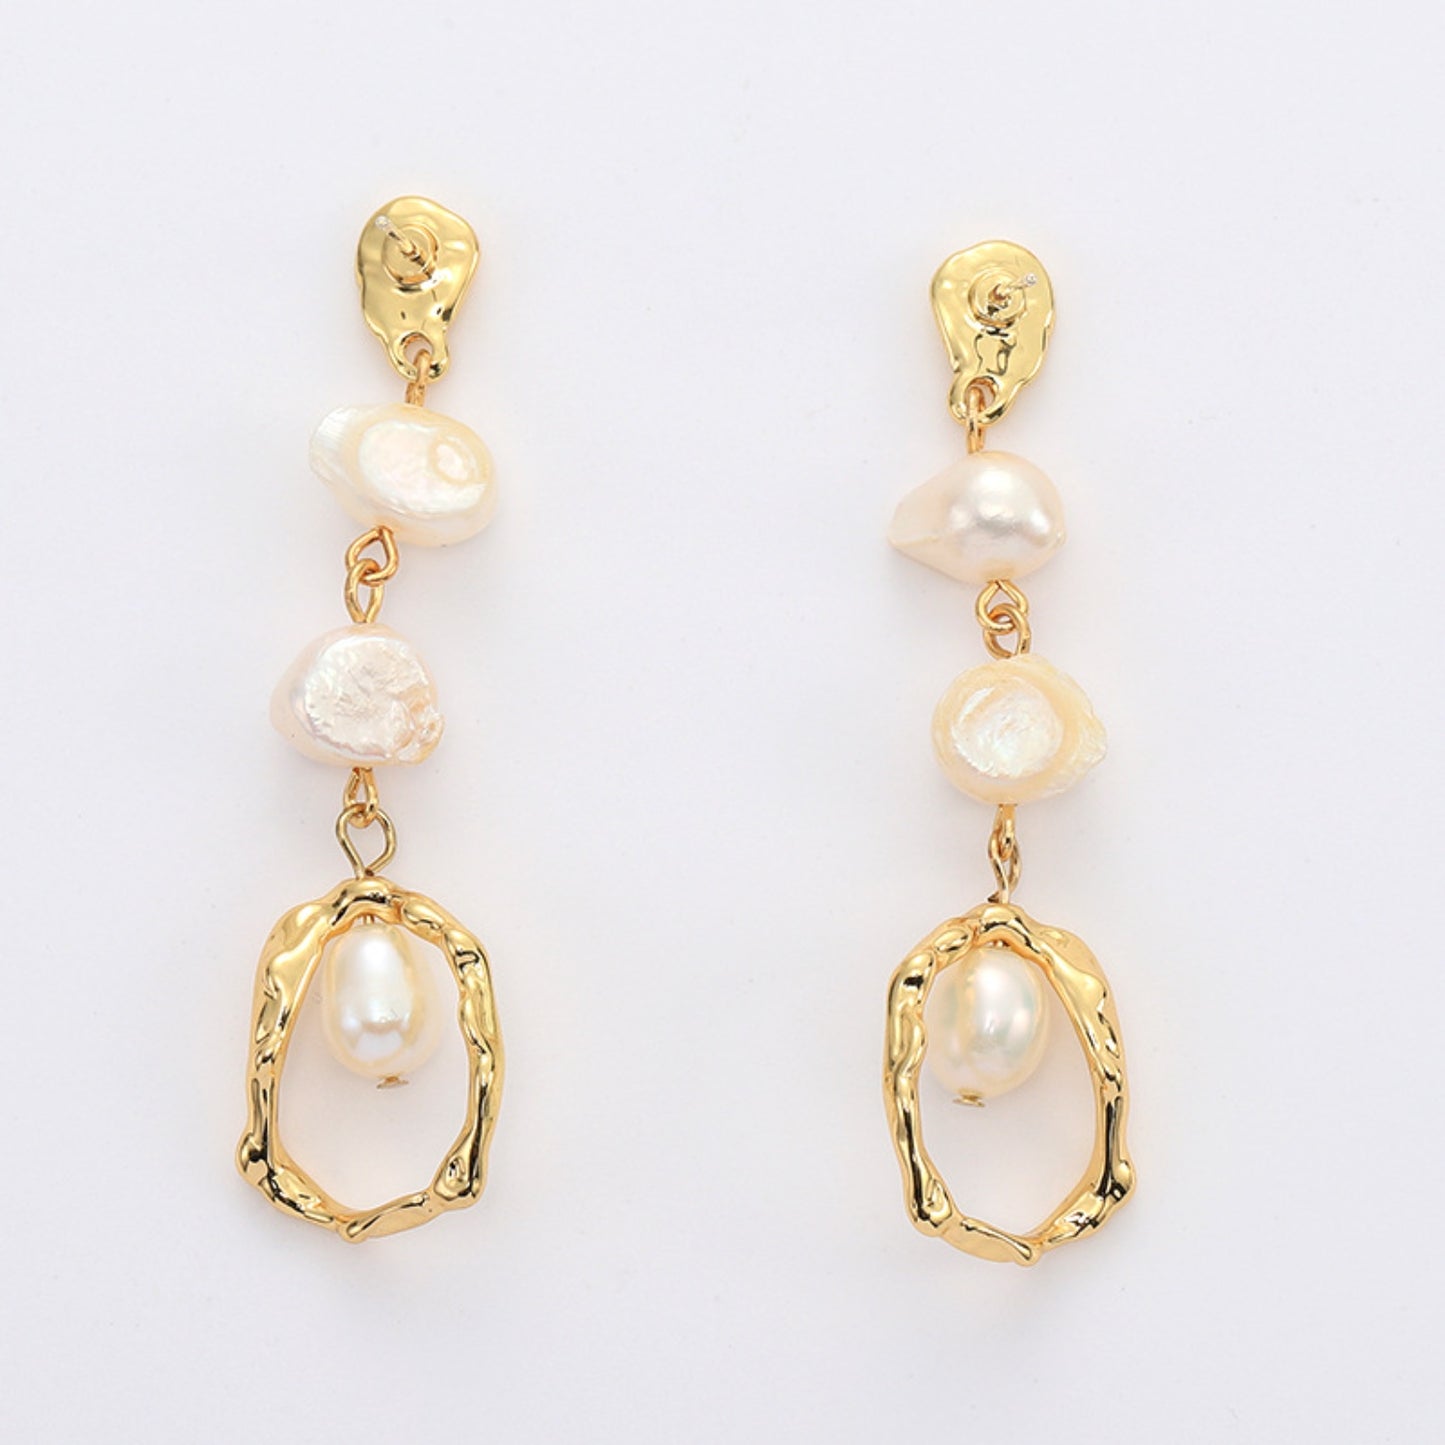 Stylish Gold-Plated Freshwater Pearl Earrings